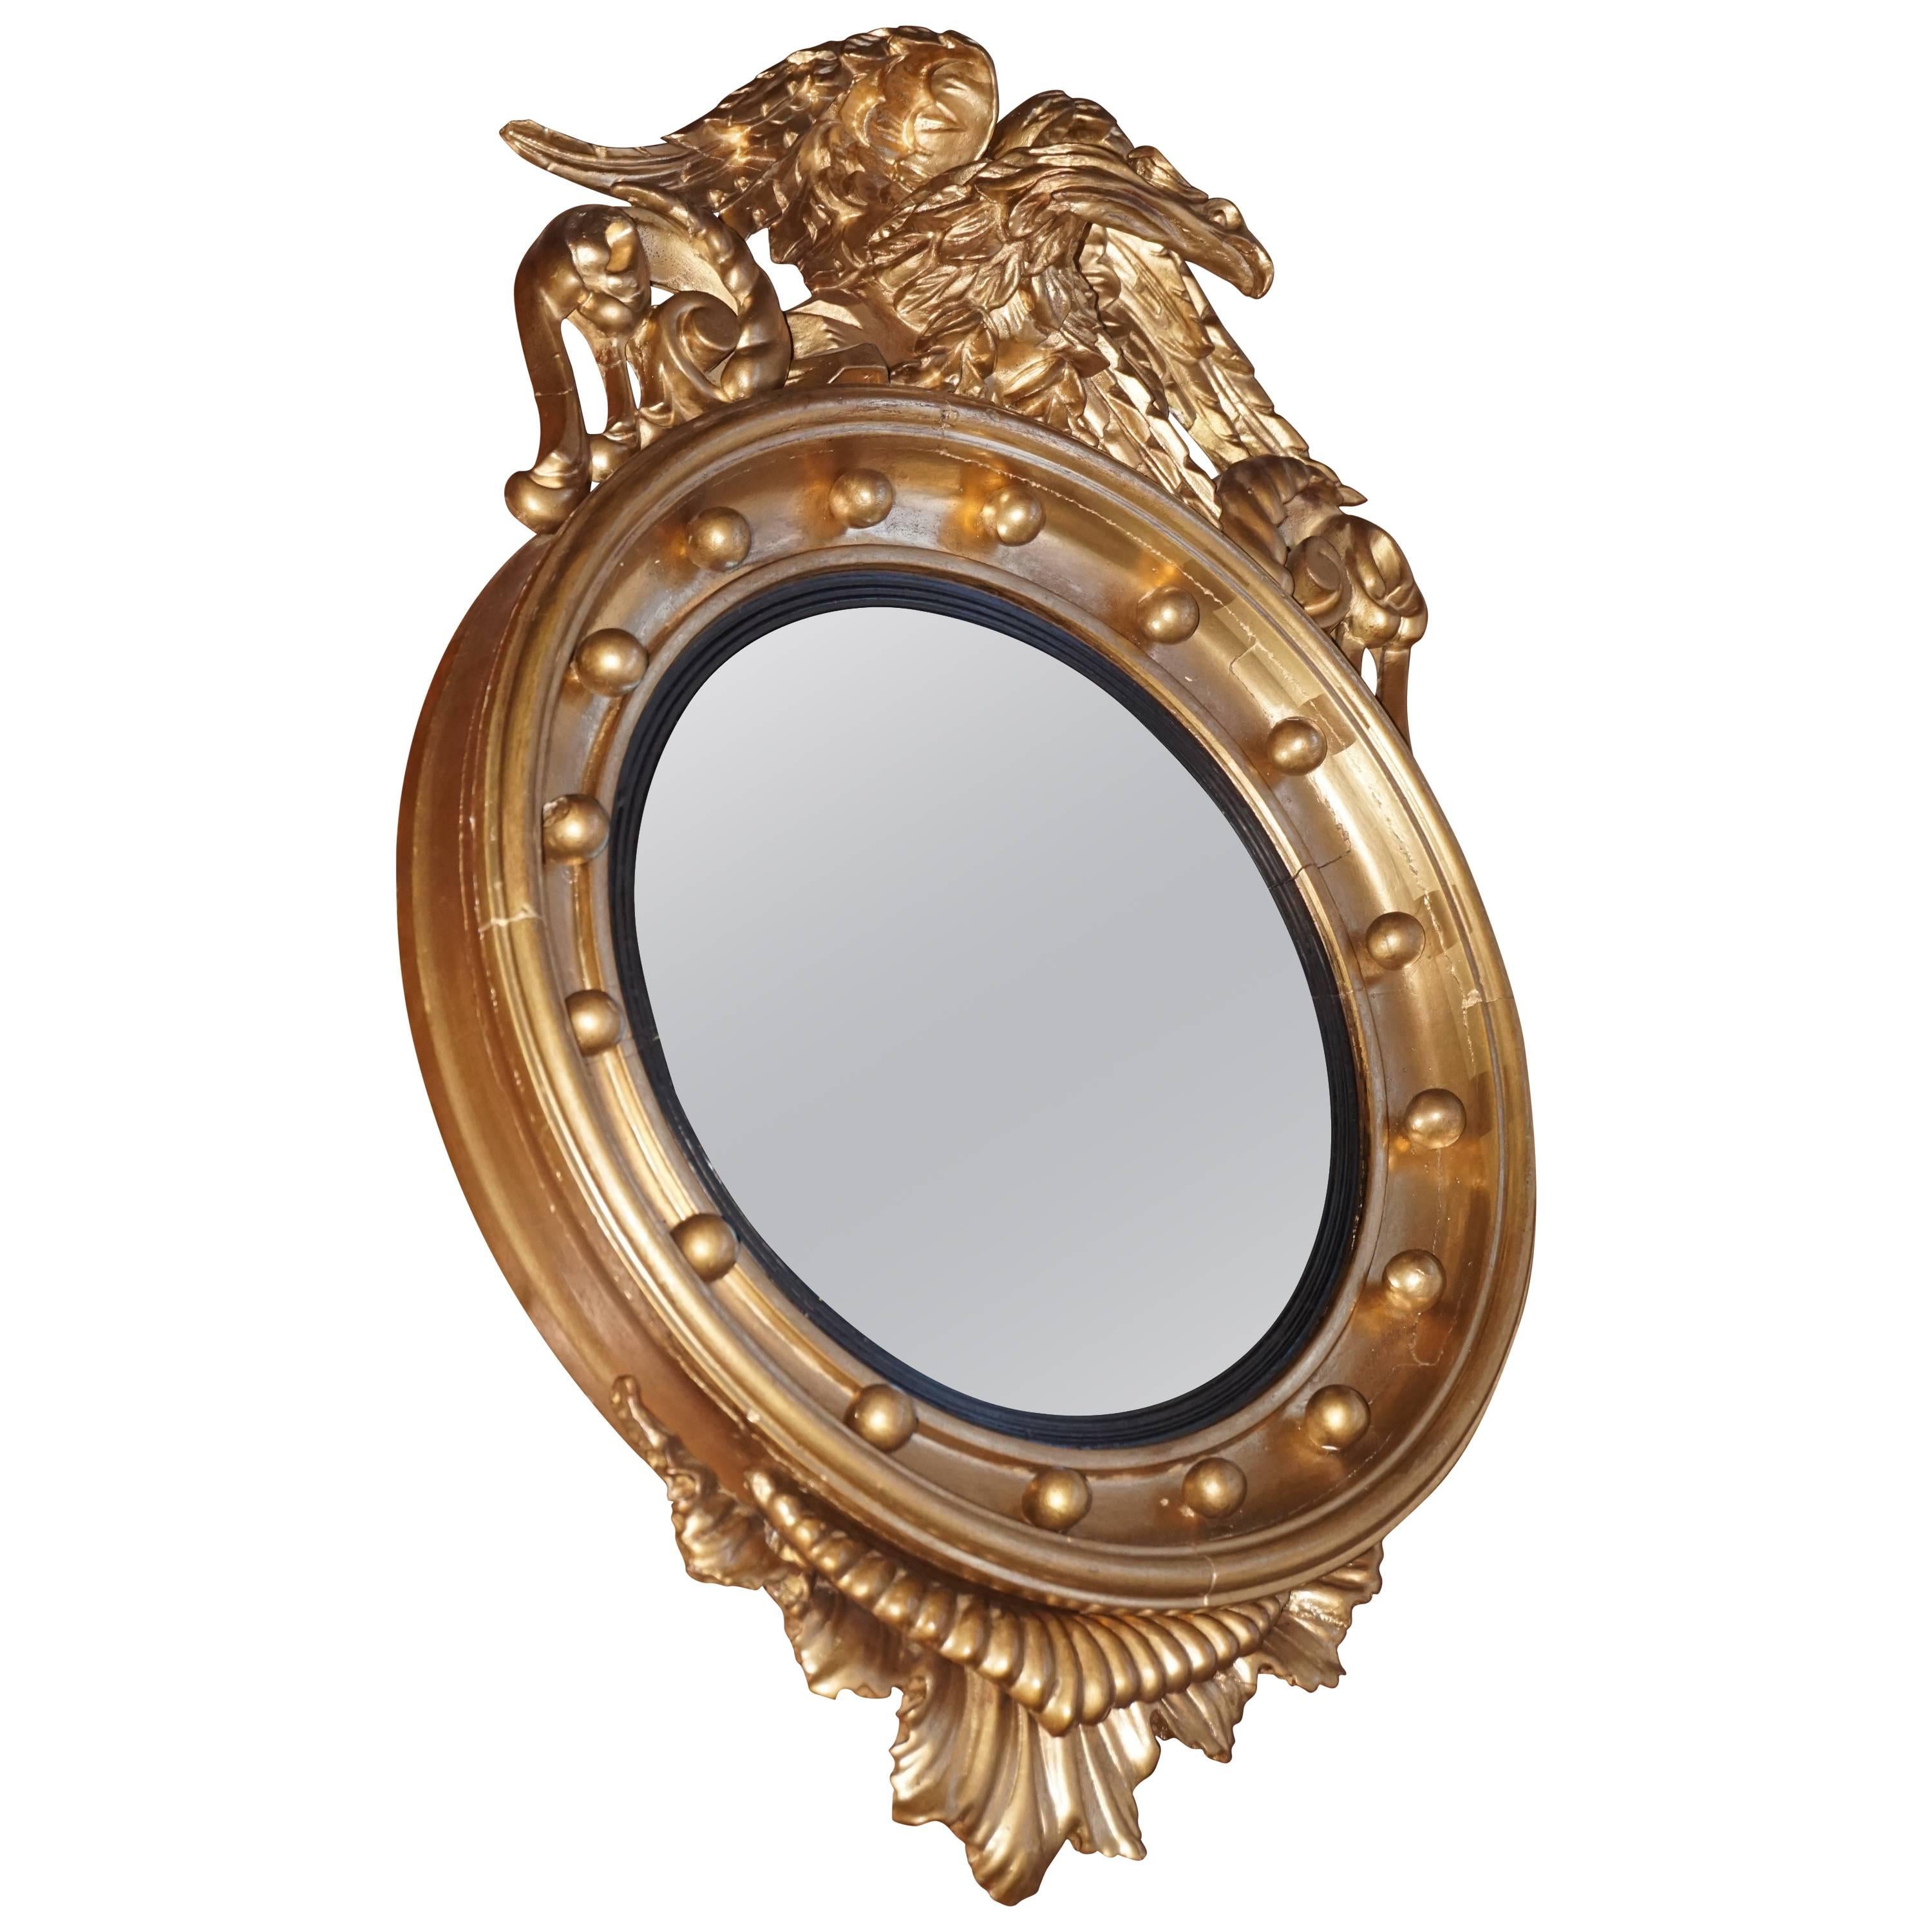 19th Century Gilt Federal Style Convex Mirror or Butler Mirror with Carved Eagle